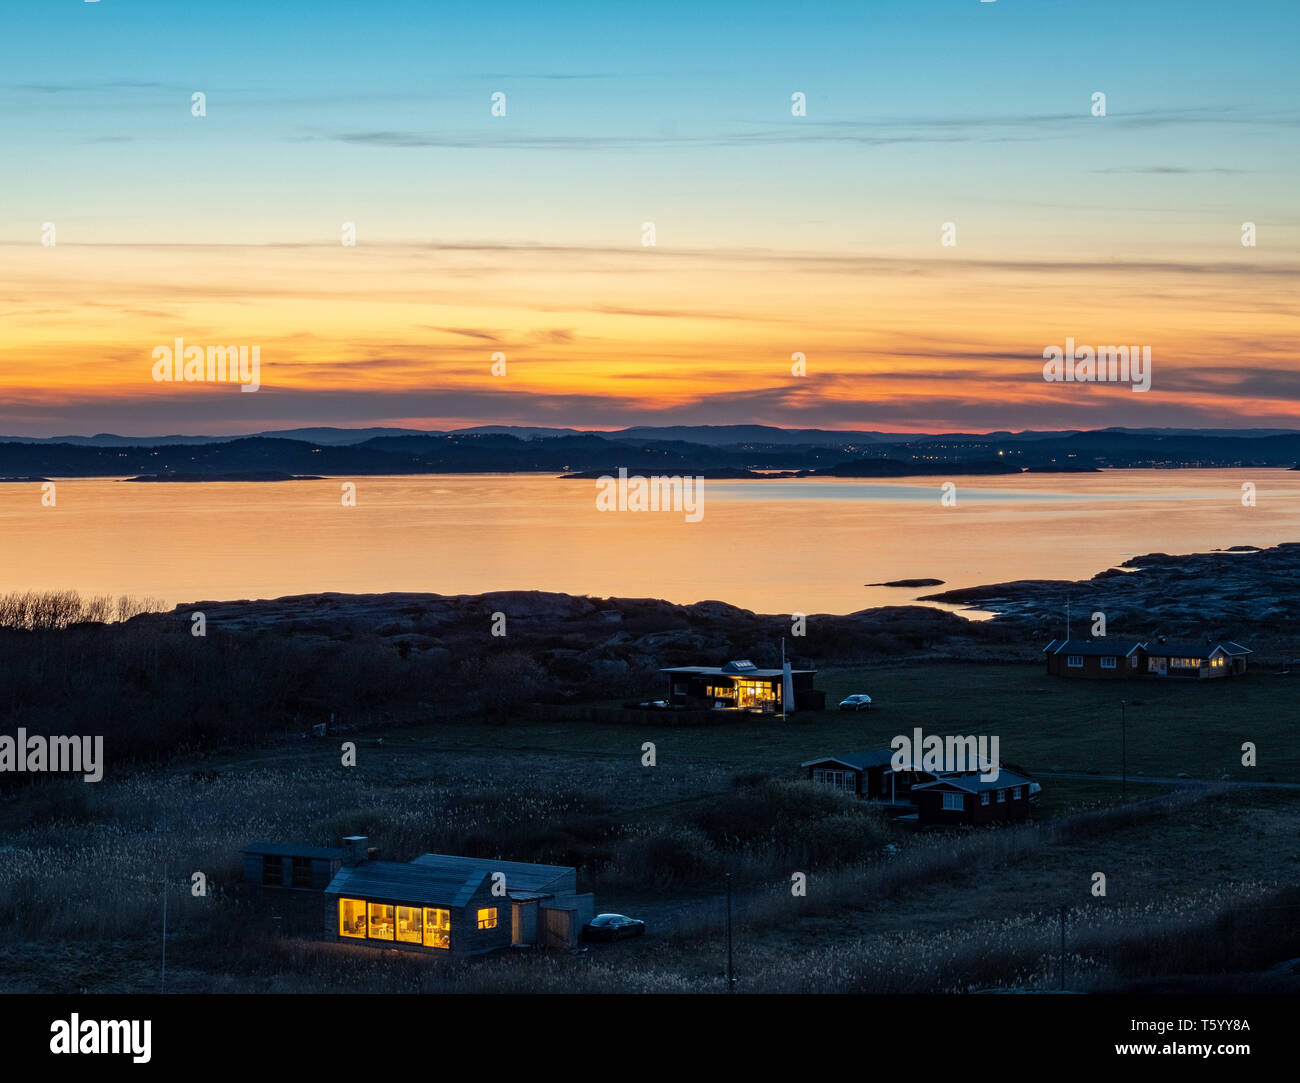 Cottages at the Oslo fjord coastline, at 'the end of the world' in Norway Stock Photo